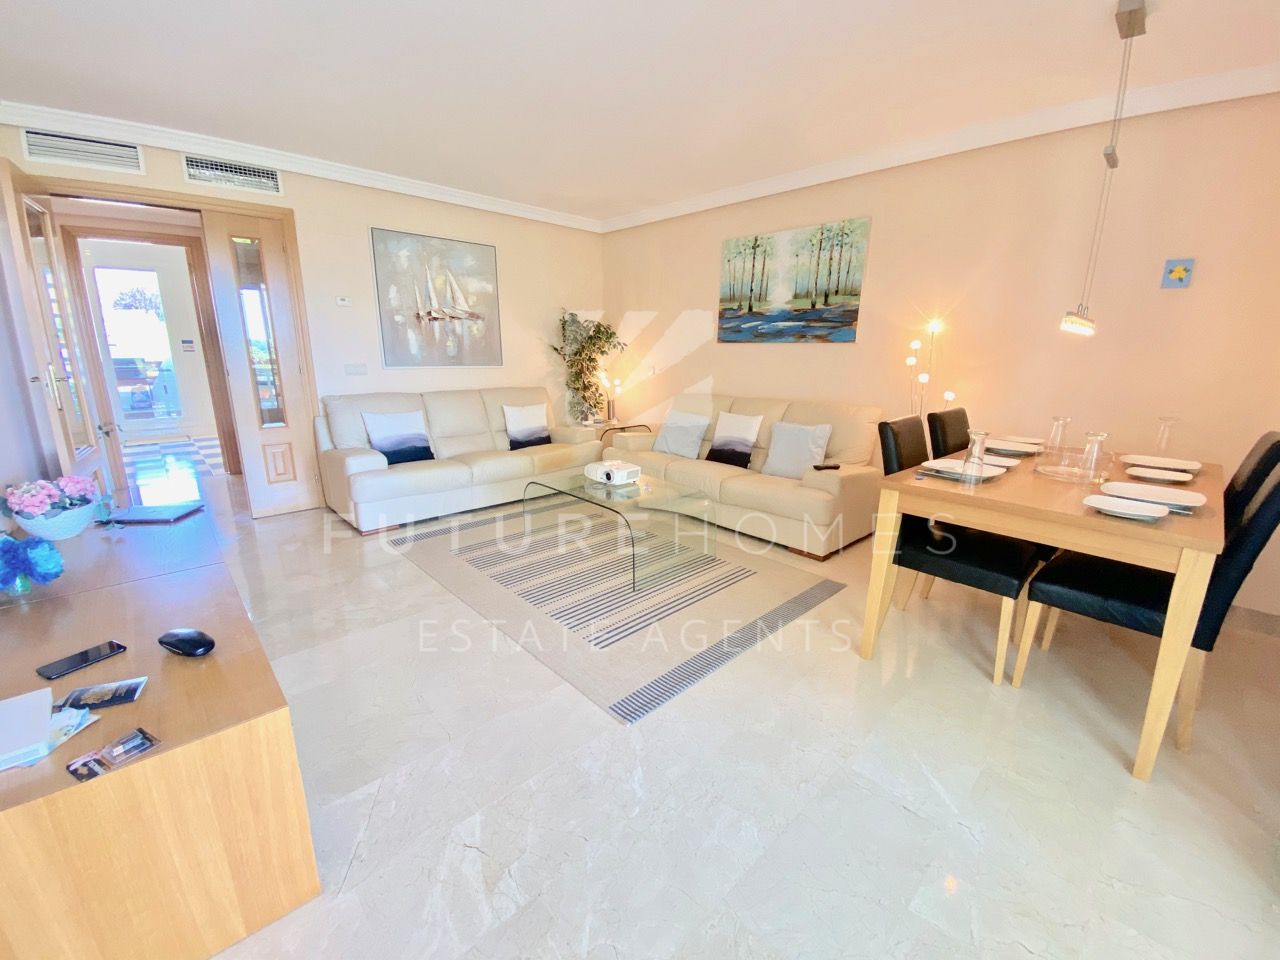 Immaculate first floor apartment for sale in Selwo Estepona 